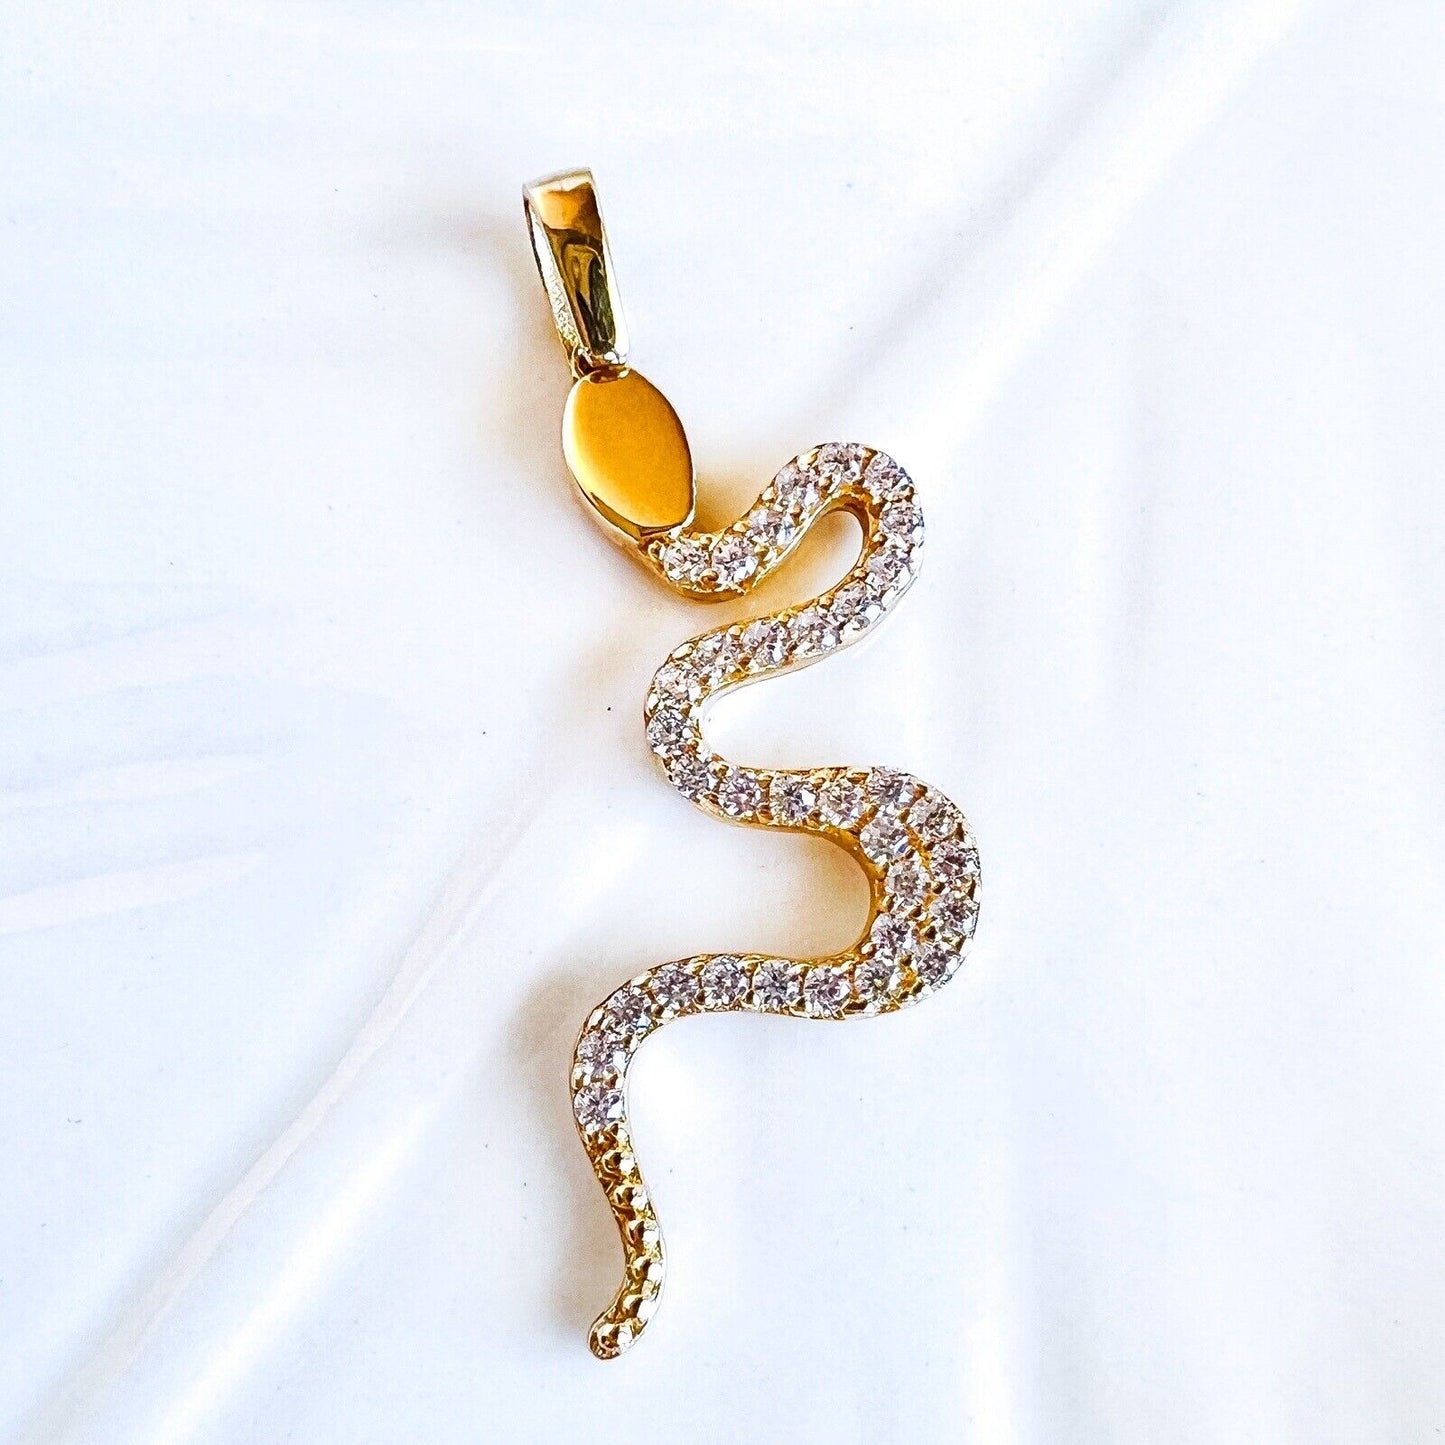 Solid 14K Yellow Gold Slithering Snake Charm/Pendant, New